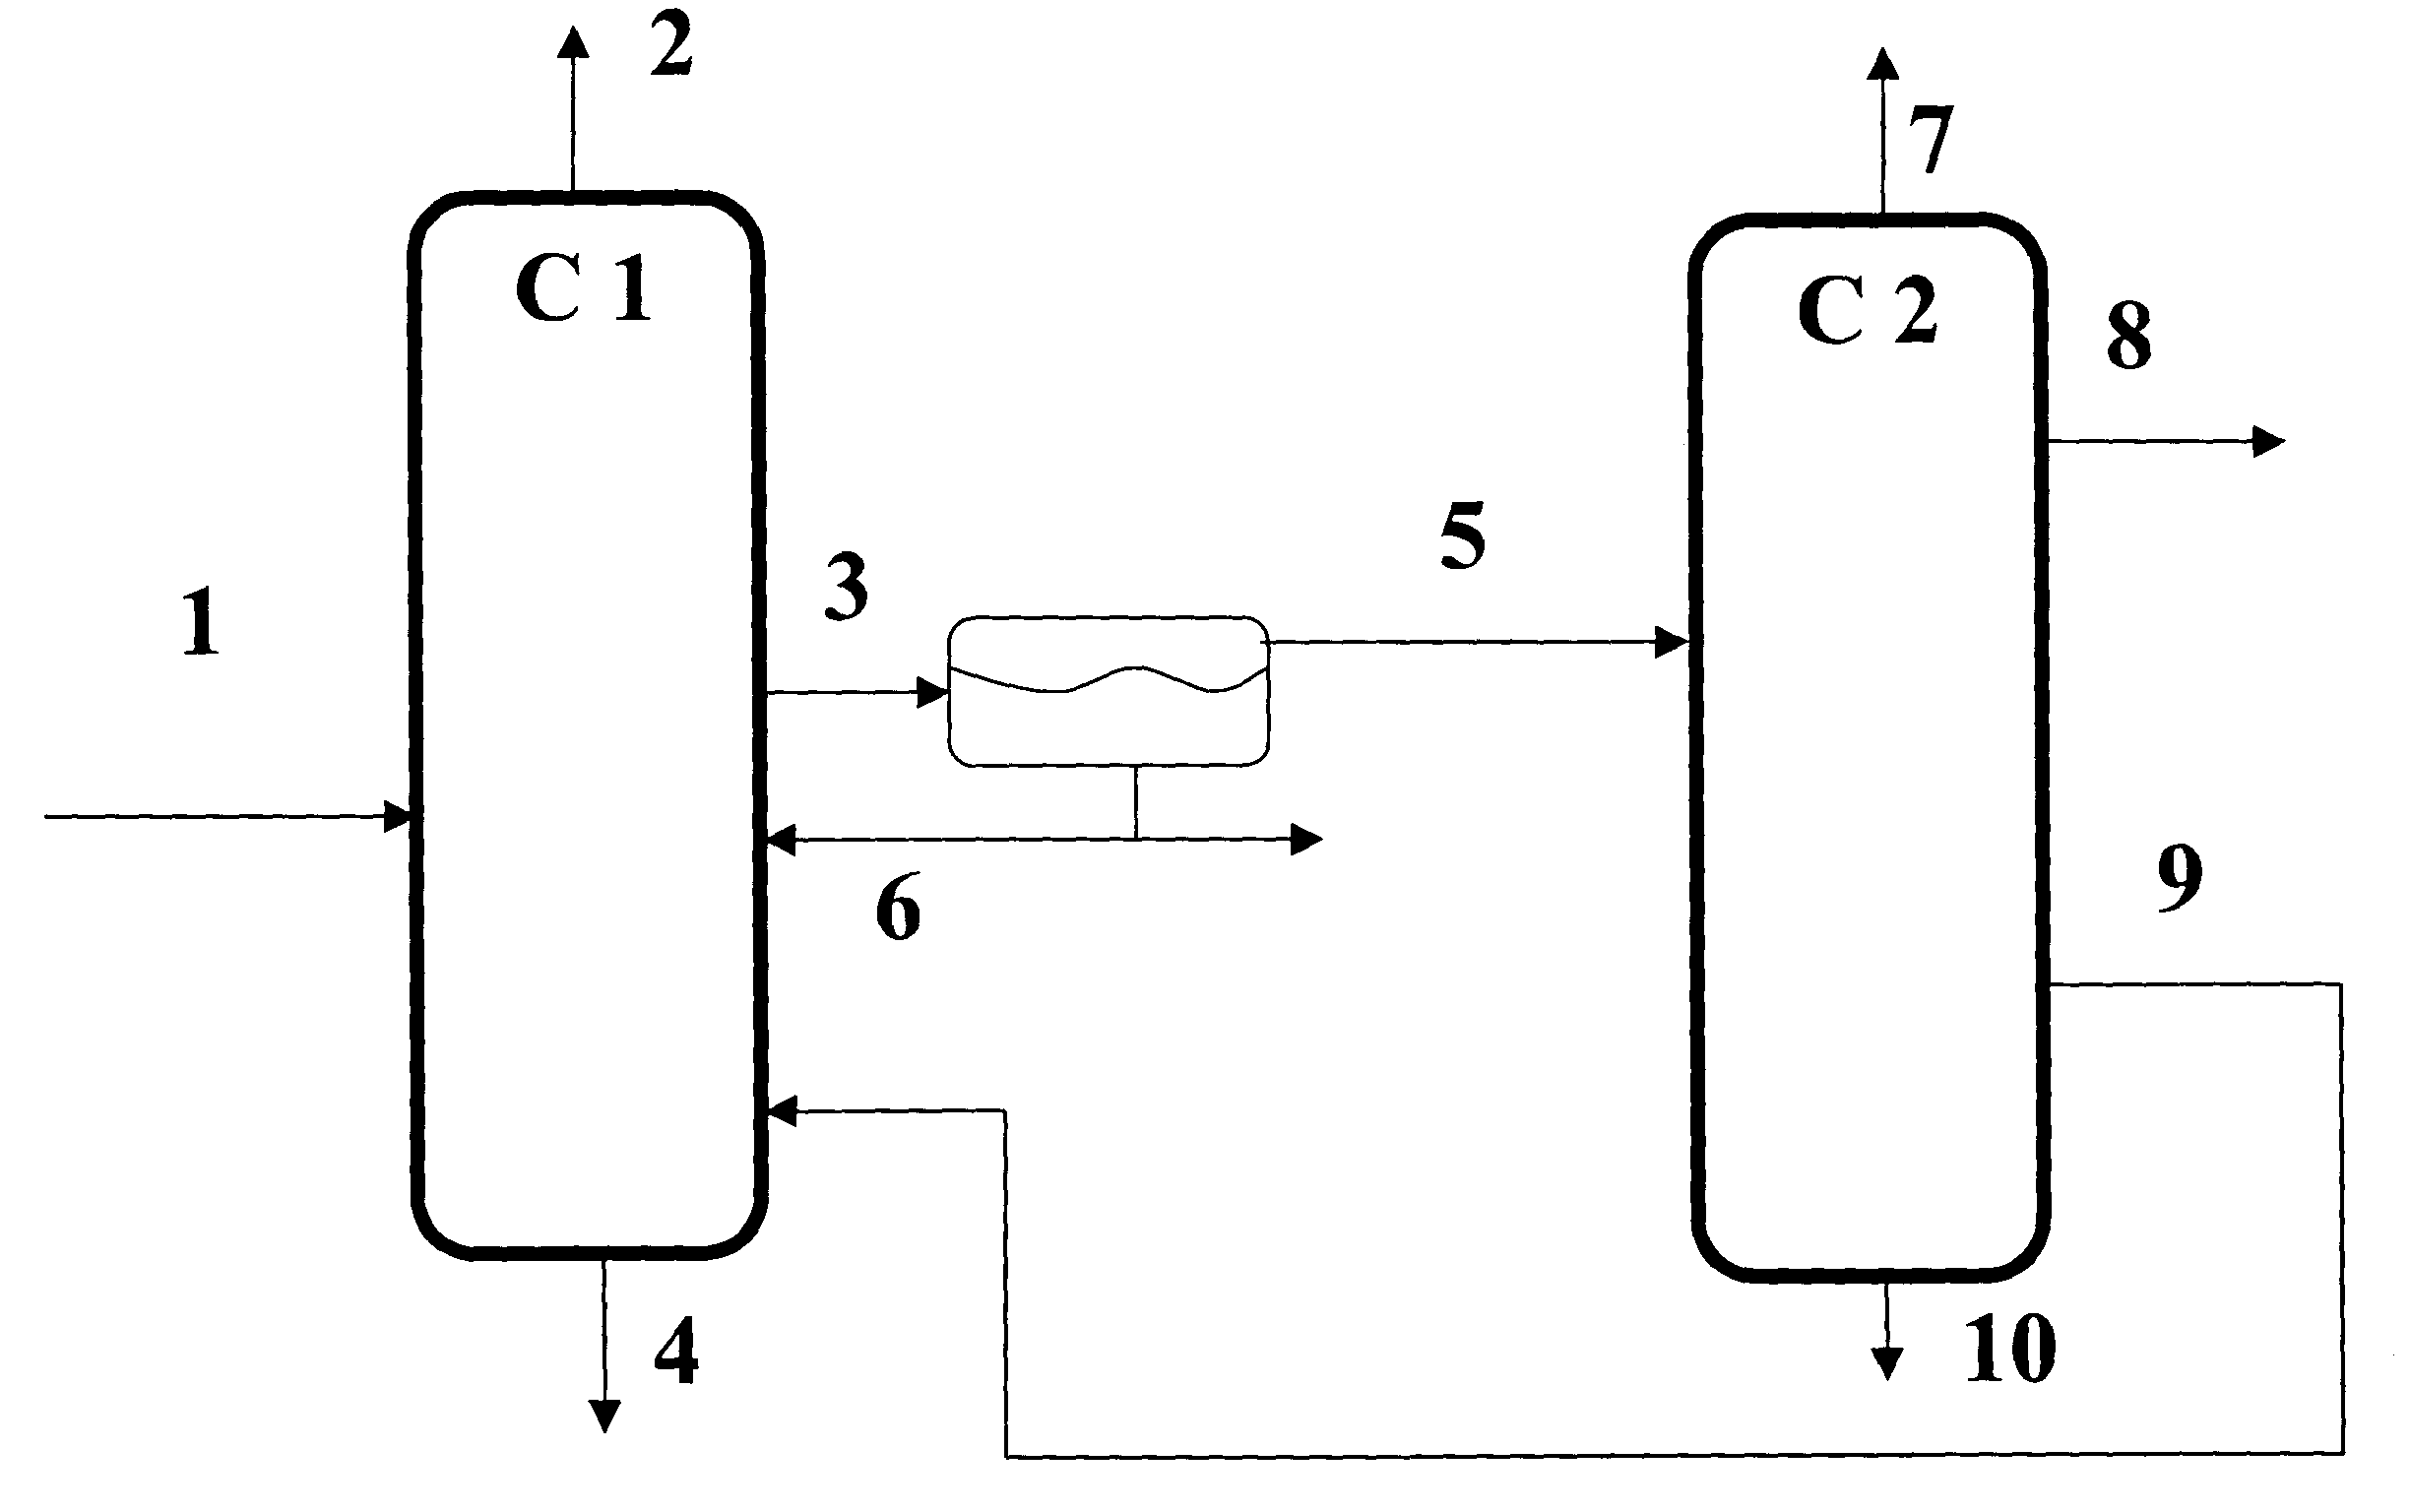 Continuous process for recovering acetone from a waste stream resulting from acetone purification